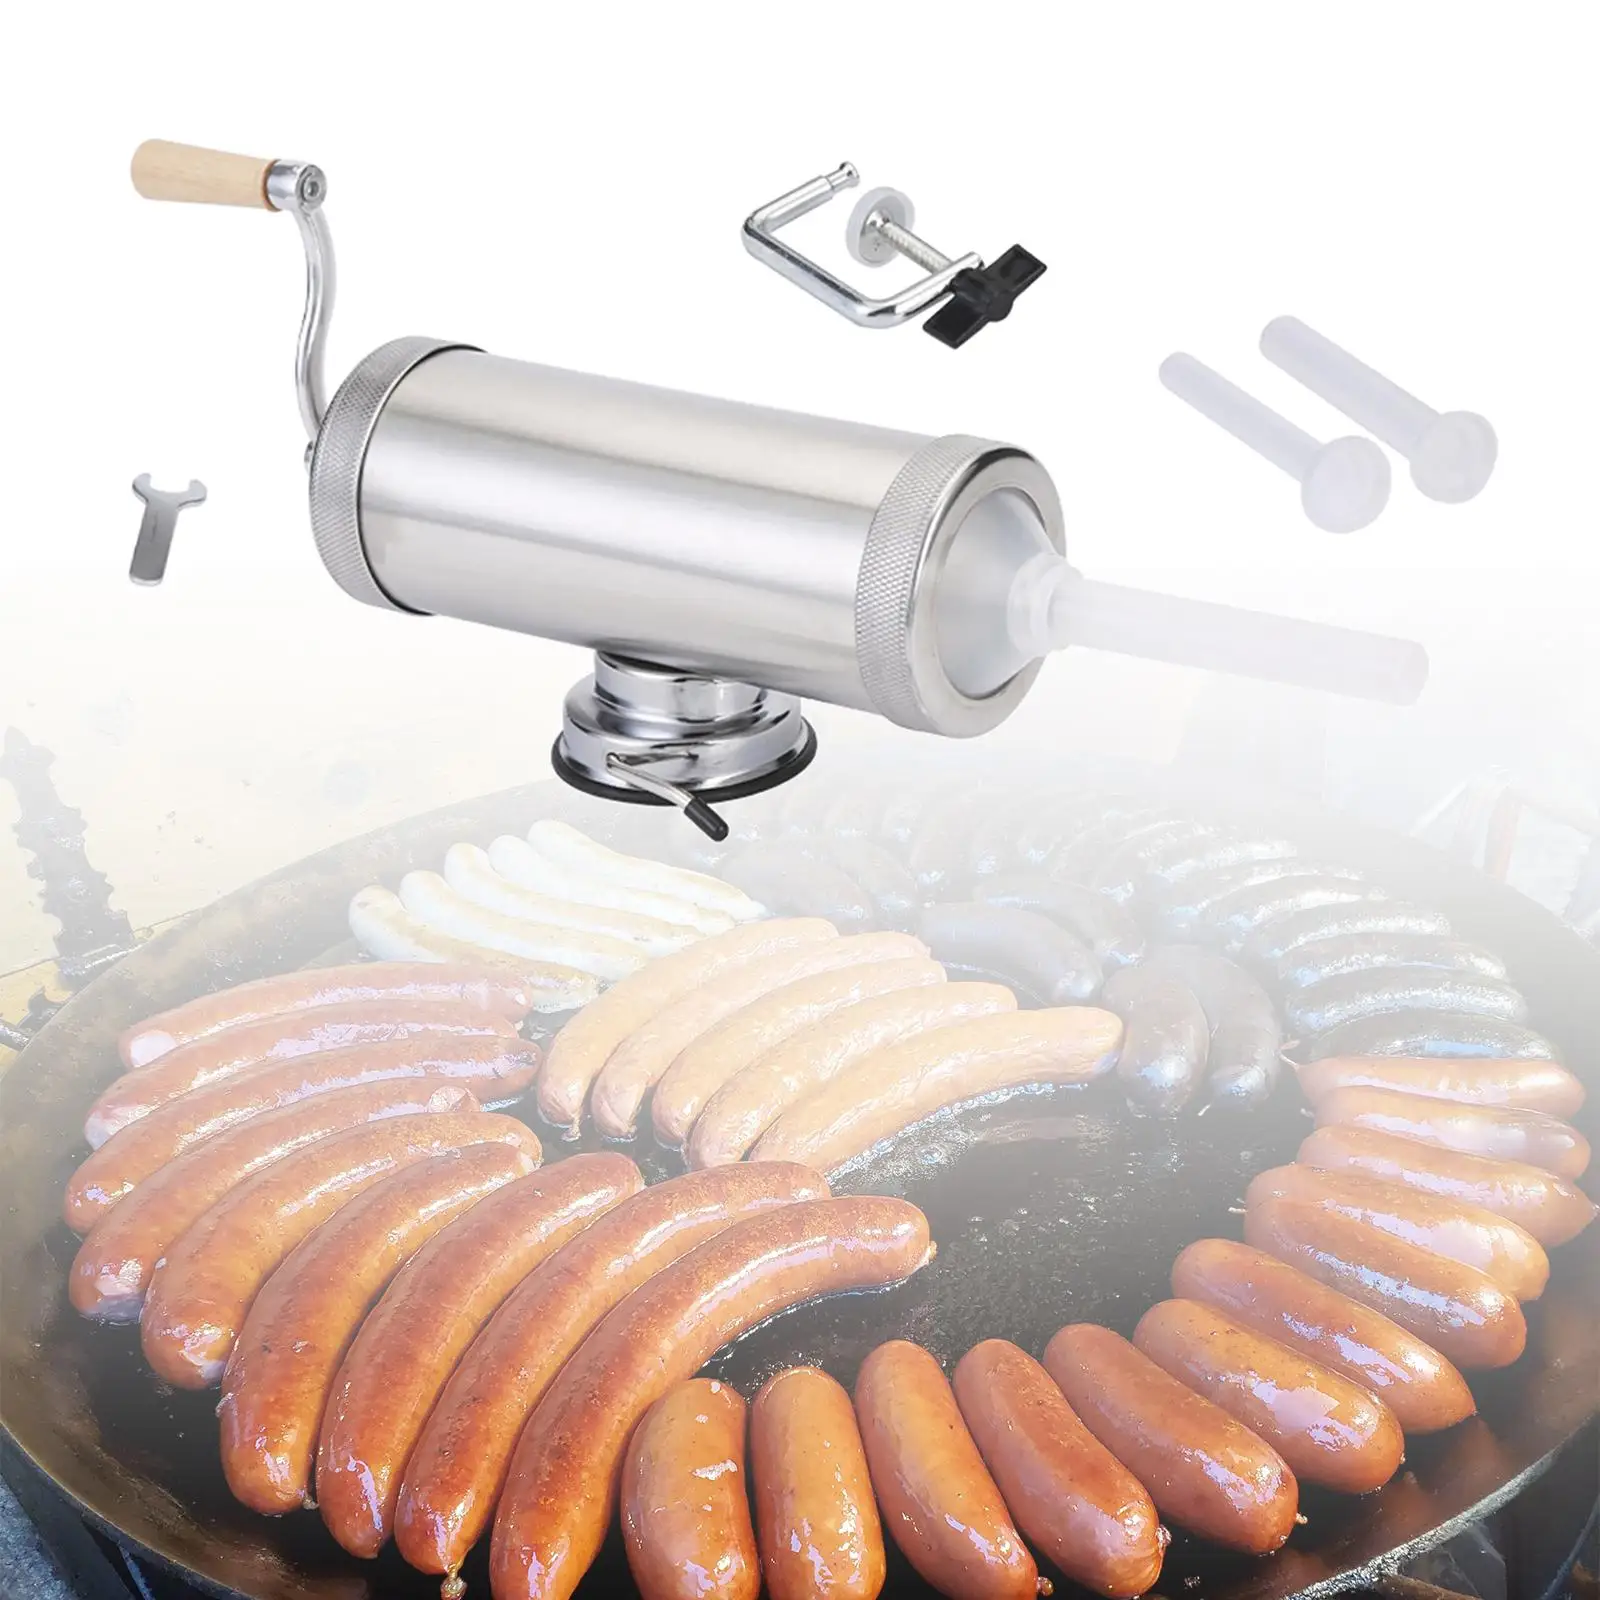 Sausage Stuffer Machine 5lbs Household Kitchen Gadgets Homemade Effective with 3 Attachments Salami Maker Sausage Filling Tools